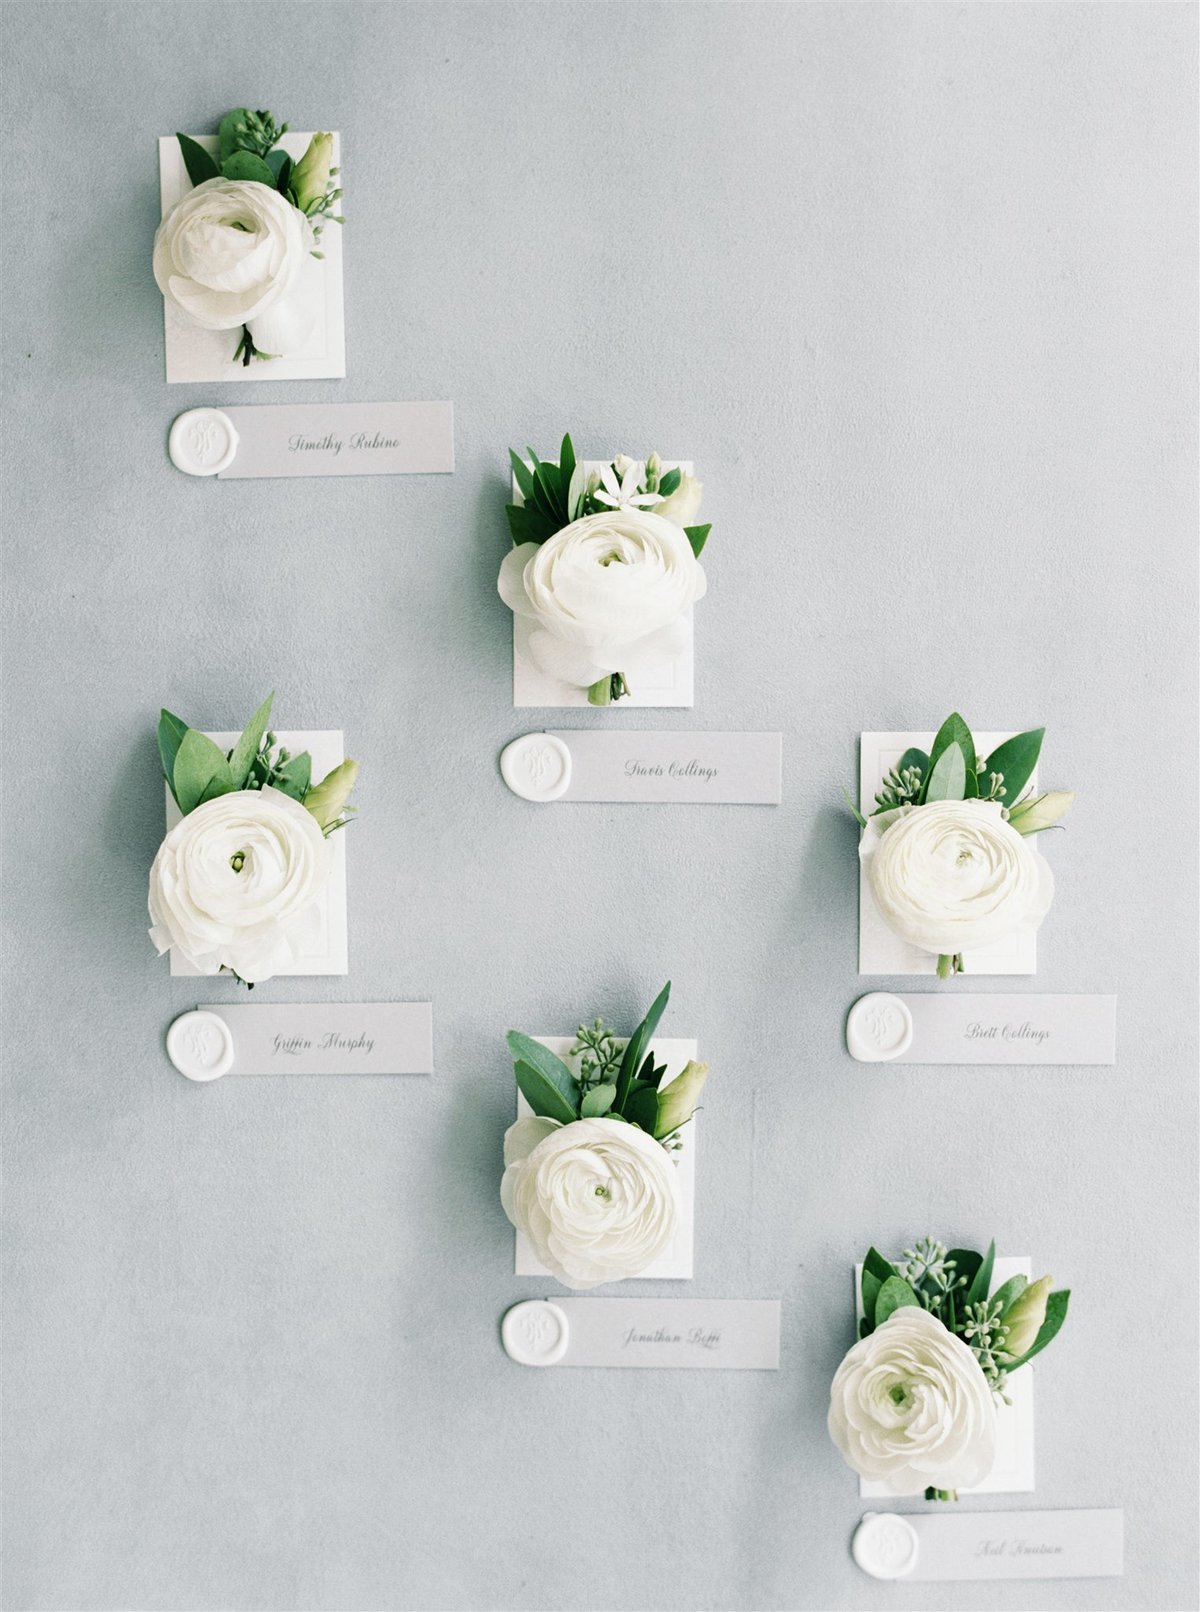 White ranunculus boutonnieres for groomsmenfor a Cape Cod Wedding by luxury Cape Cod wedding planner and designer Always Yours Events